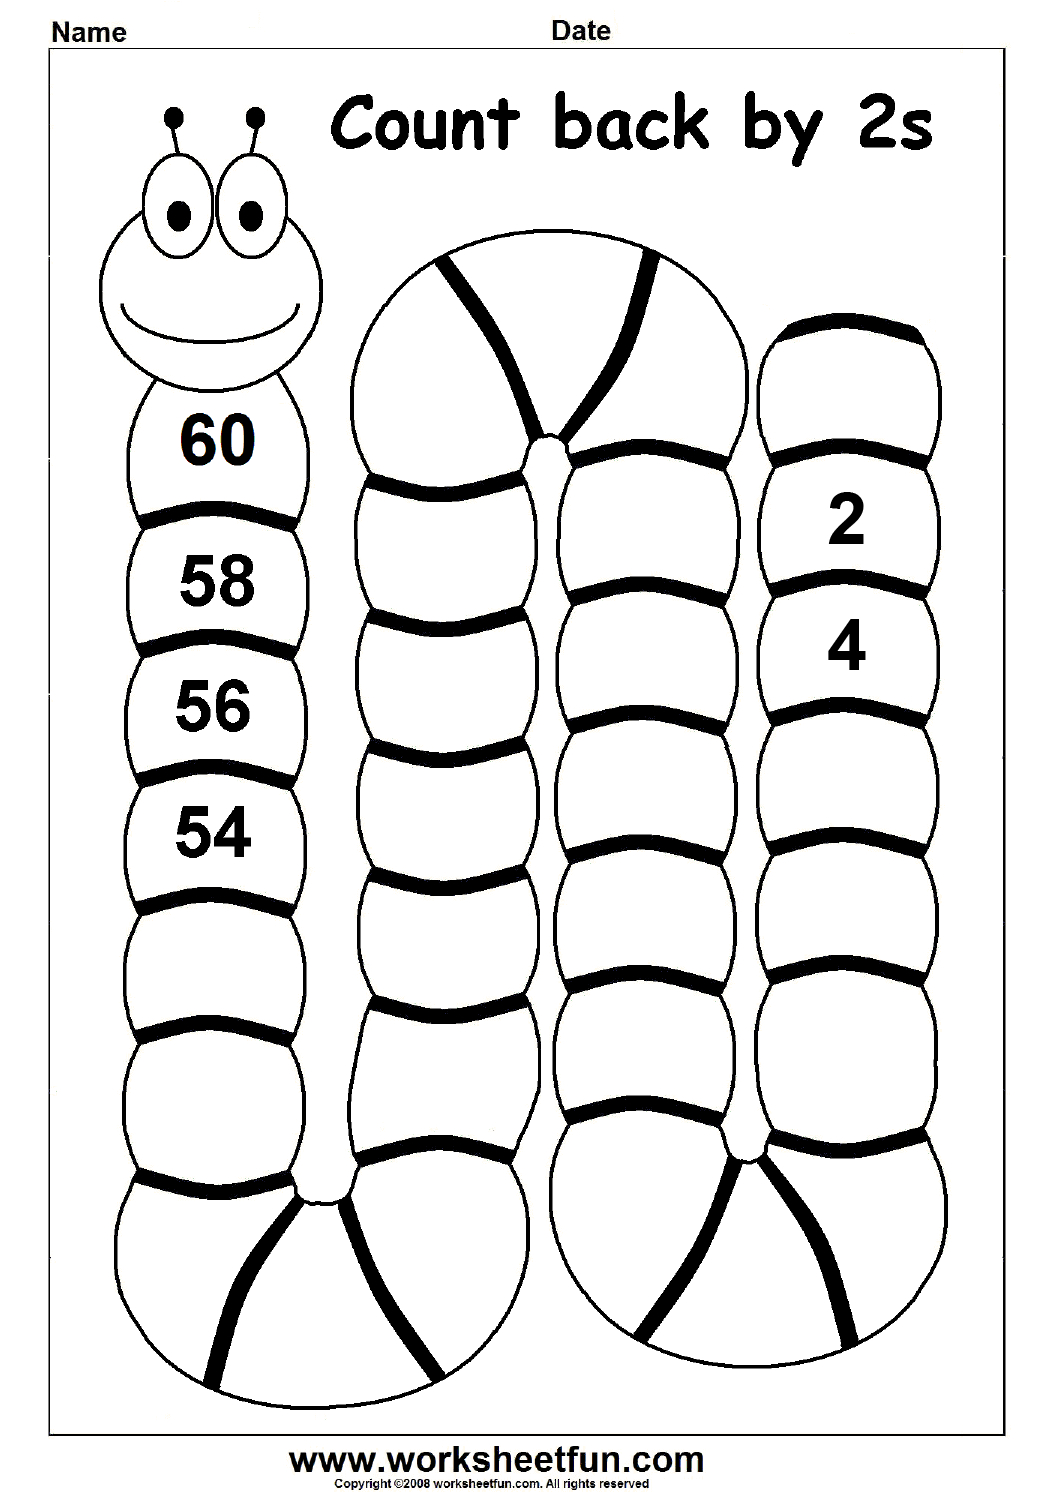 93 Worksheets For Counting In Twos, Counting In Twos Worksheets For | Counting In Twos Worksheet Printable